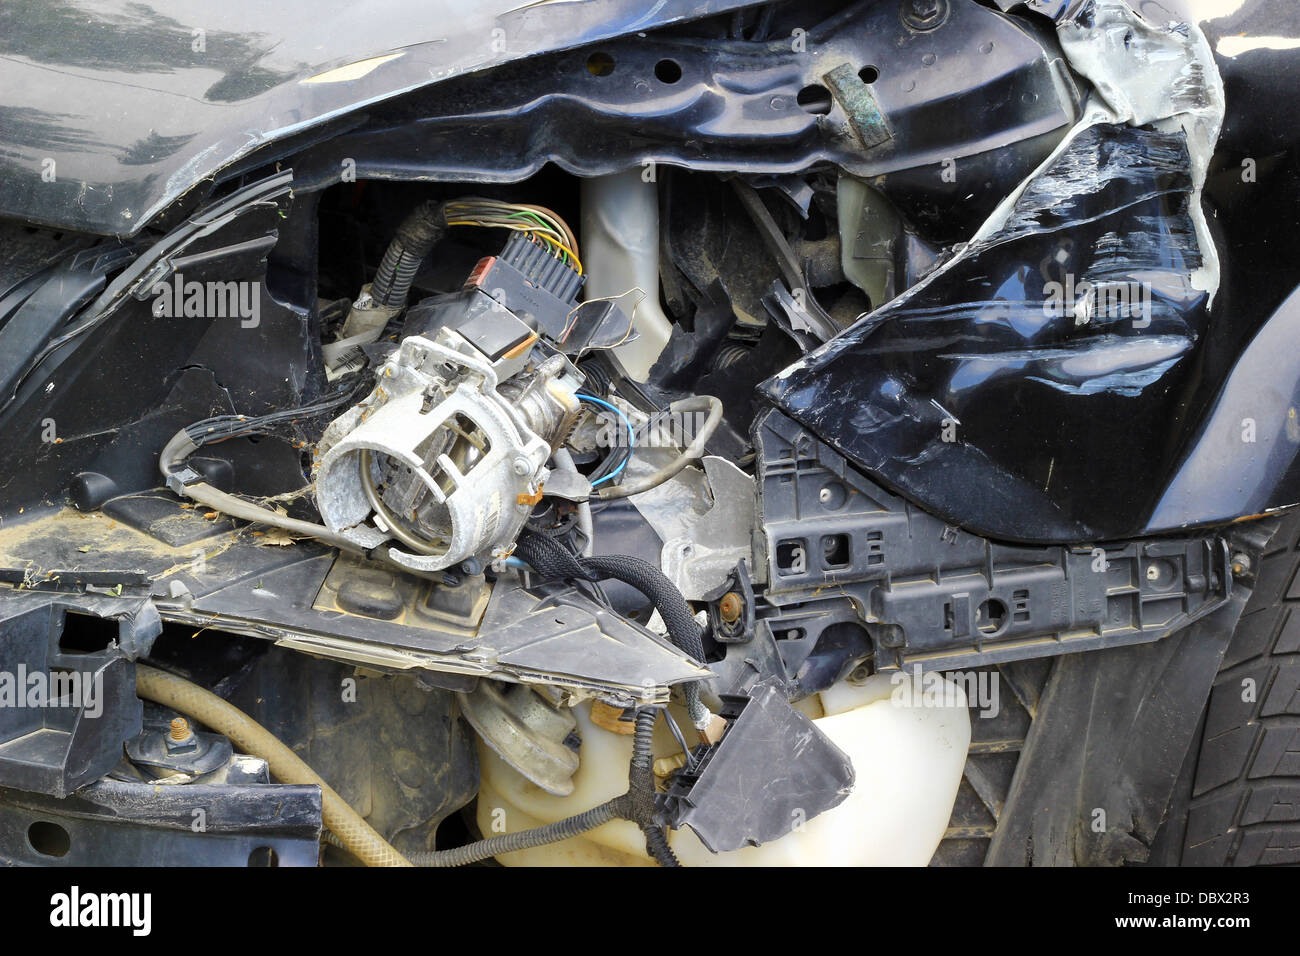 Crashed car close up. The front part is severely damaged. Stock Photo